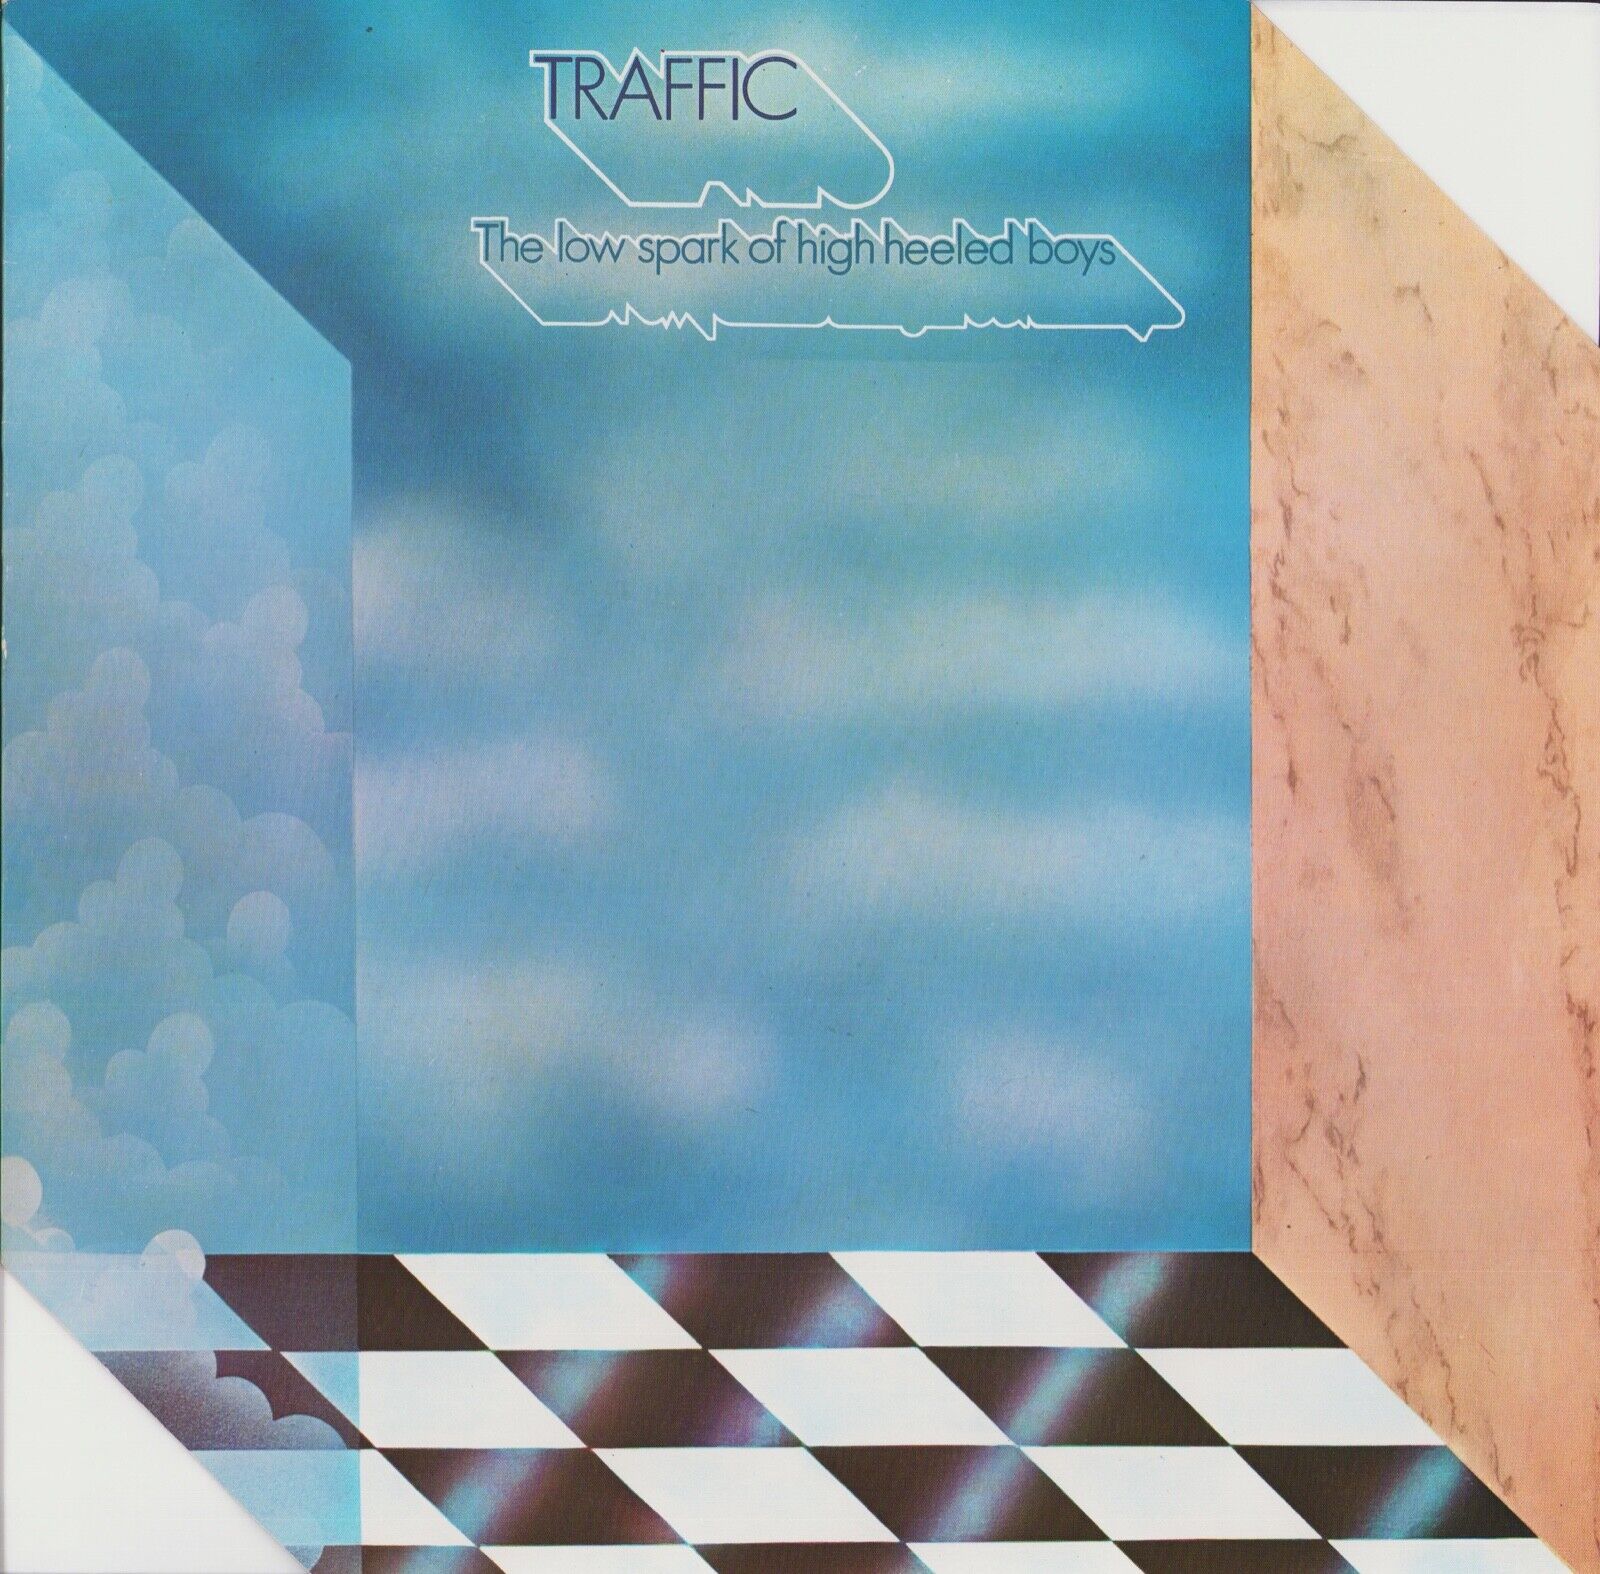 The low spark of high heeled boys by Traffic, LP with ouioui14 -  Ref:118698037